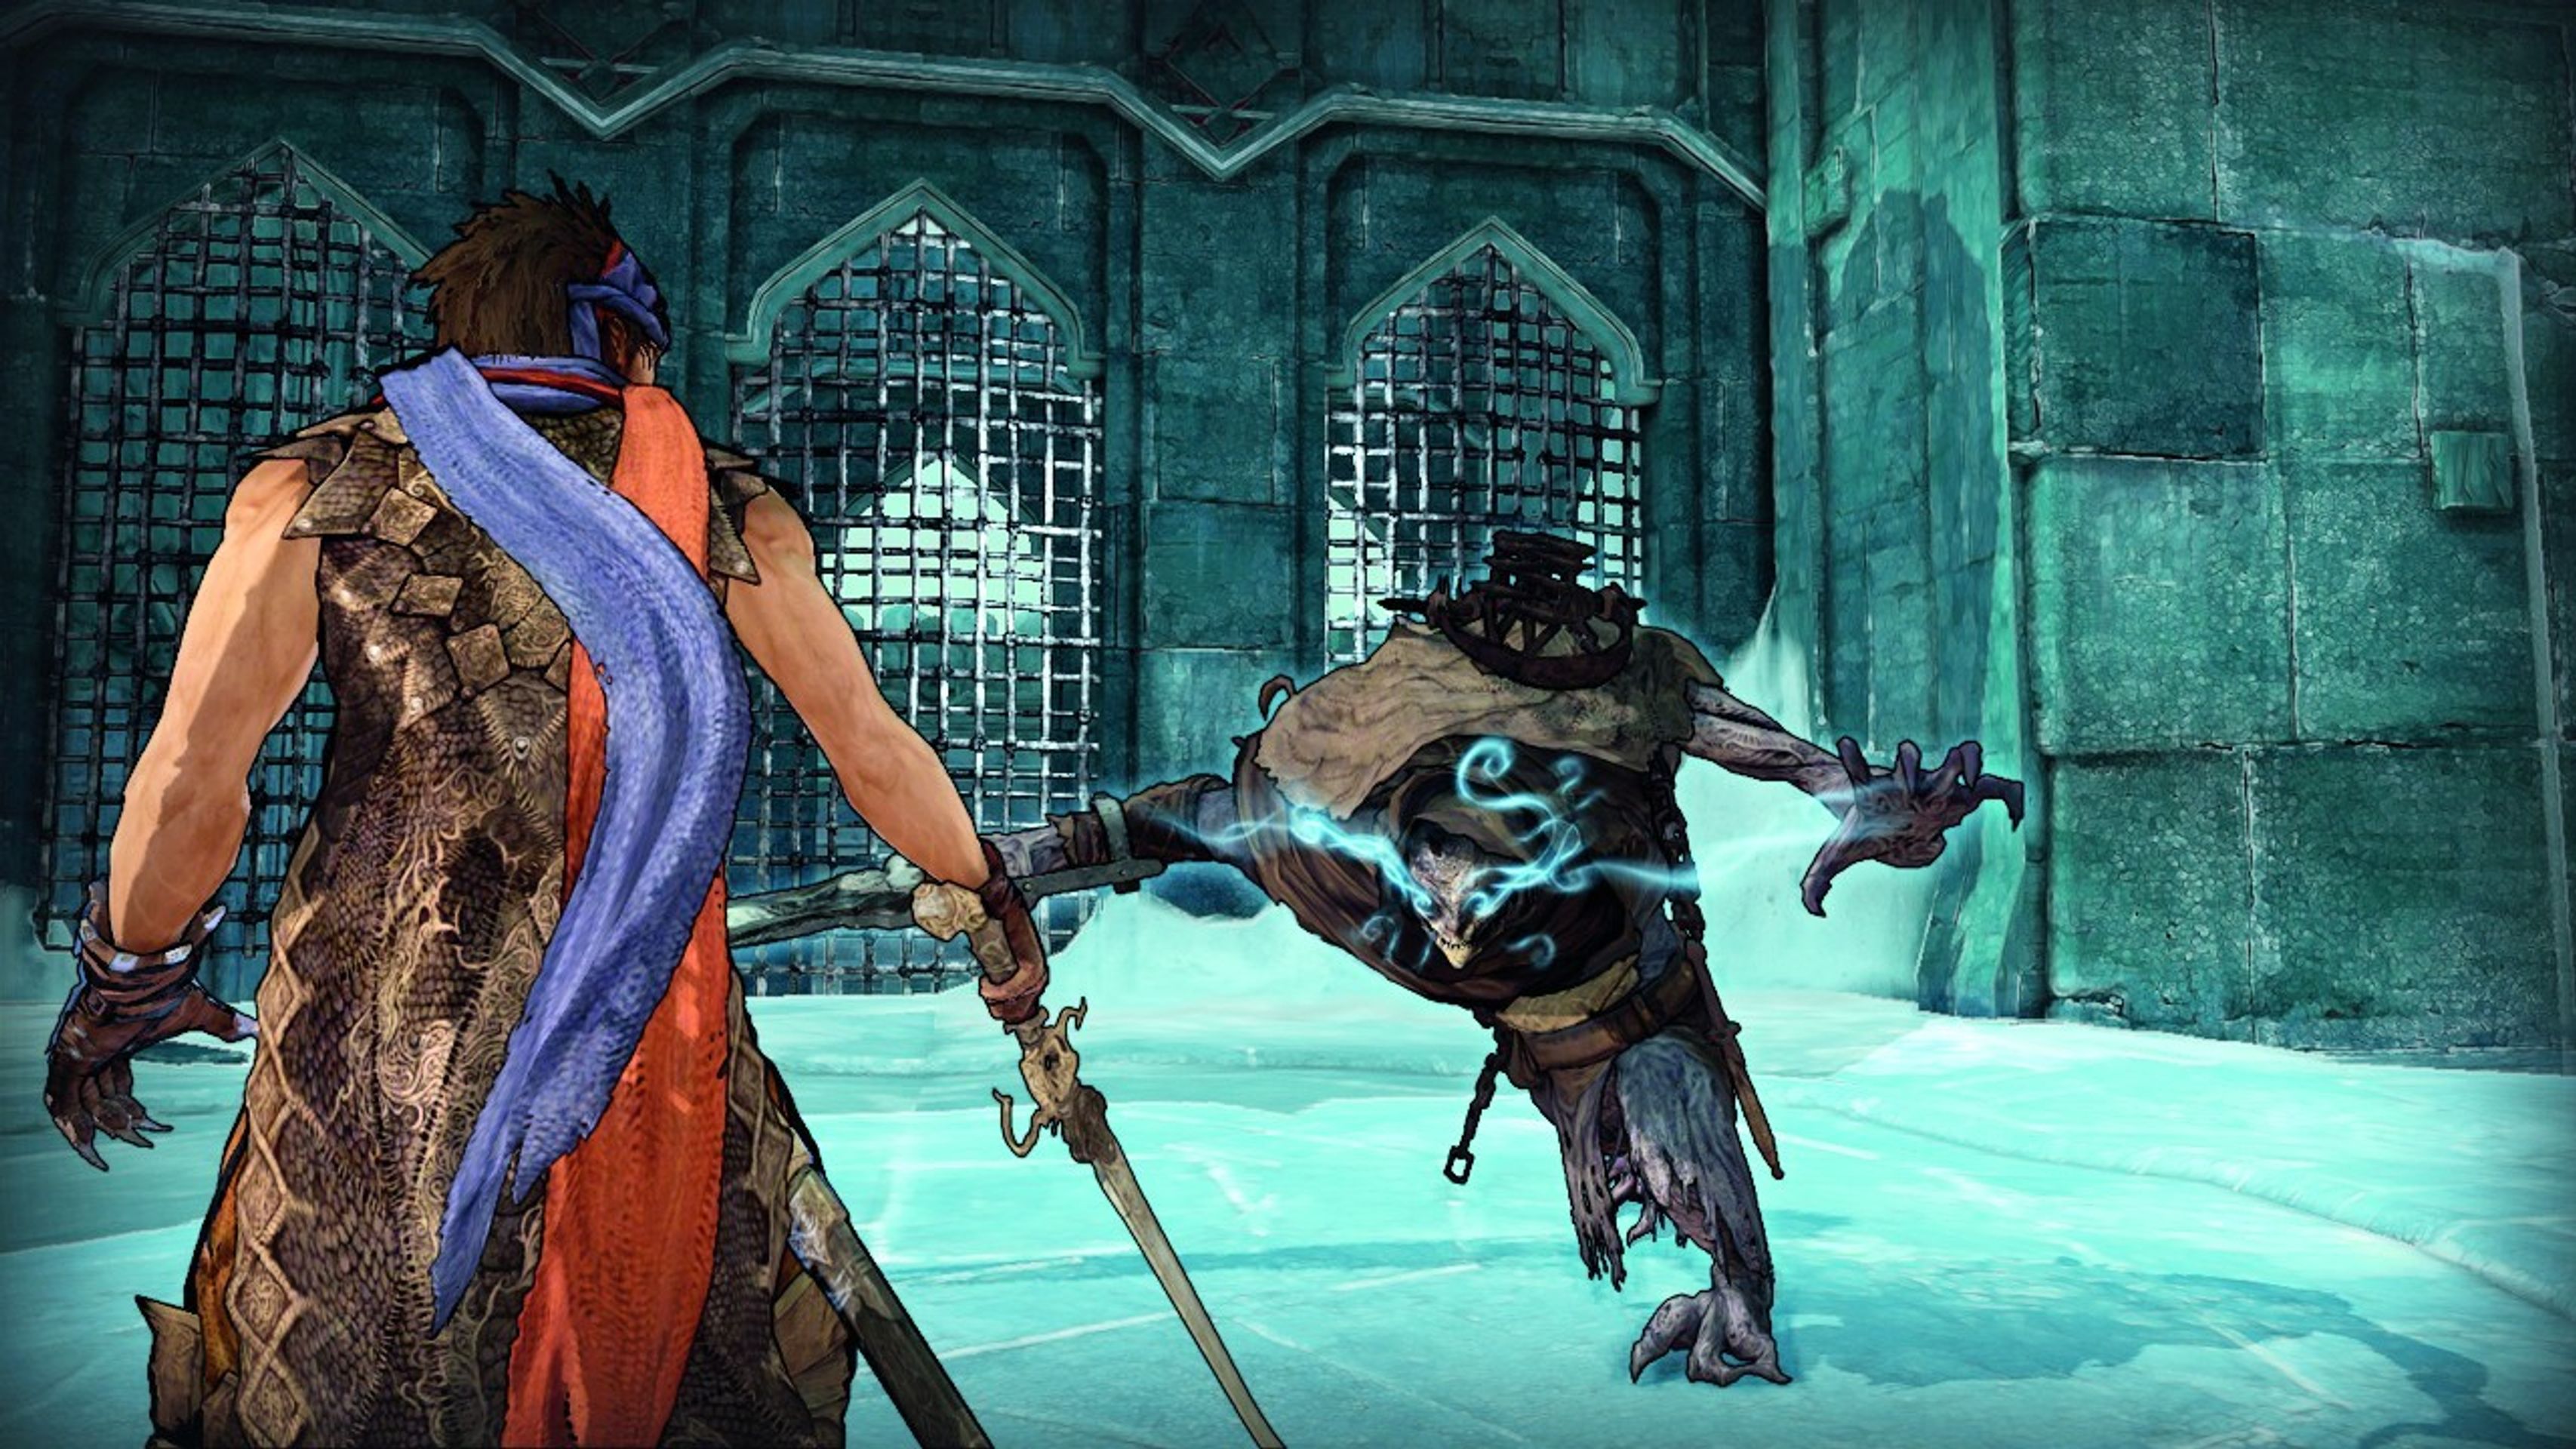 Prince of Persia - Prince of Persia galerie (7/7)